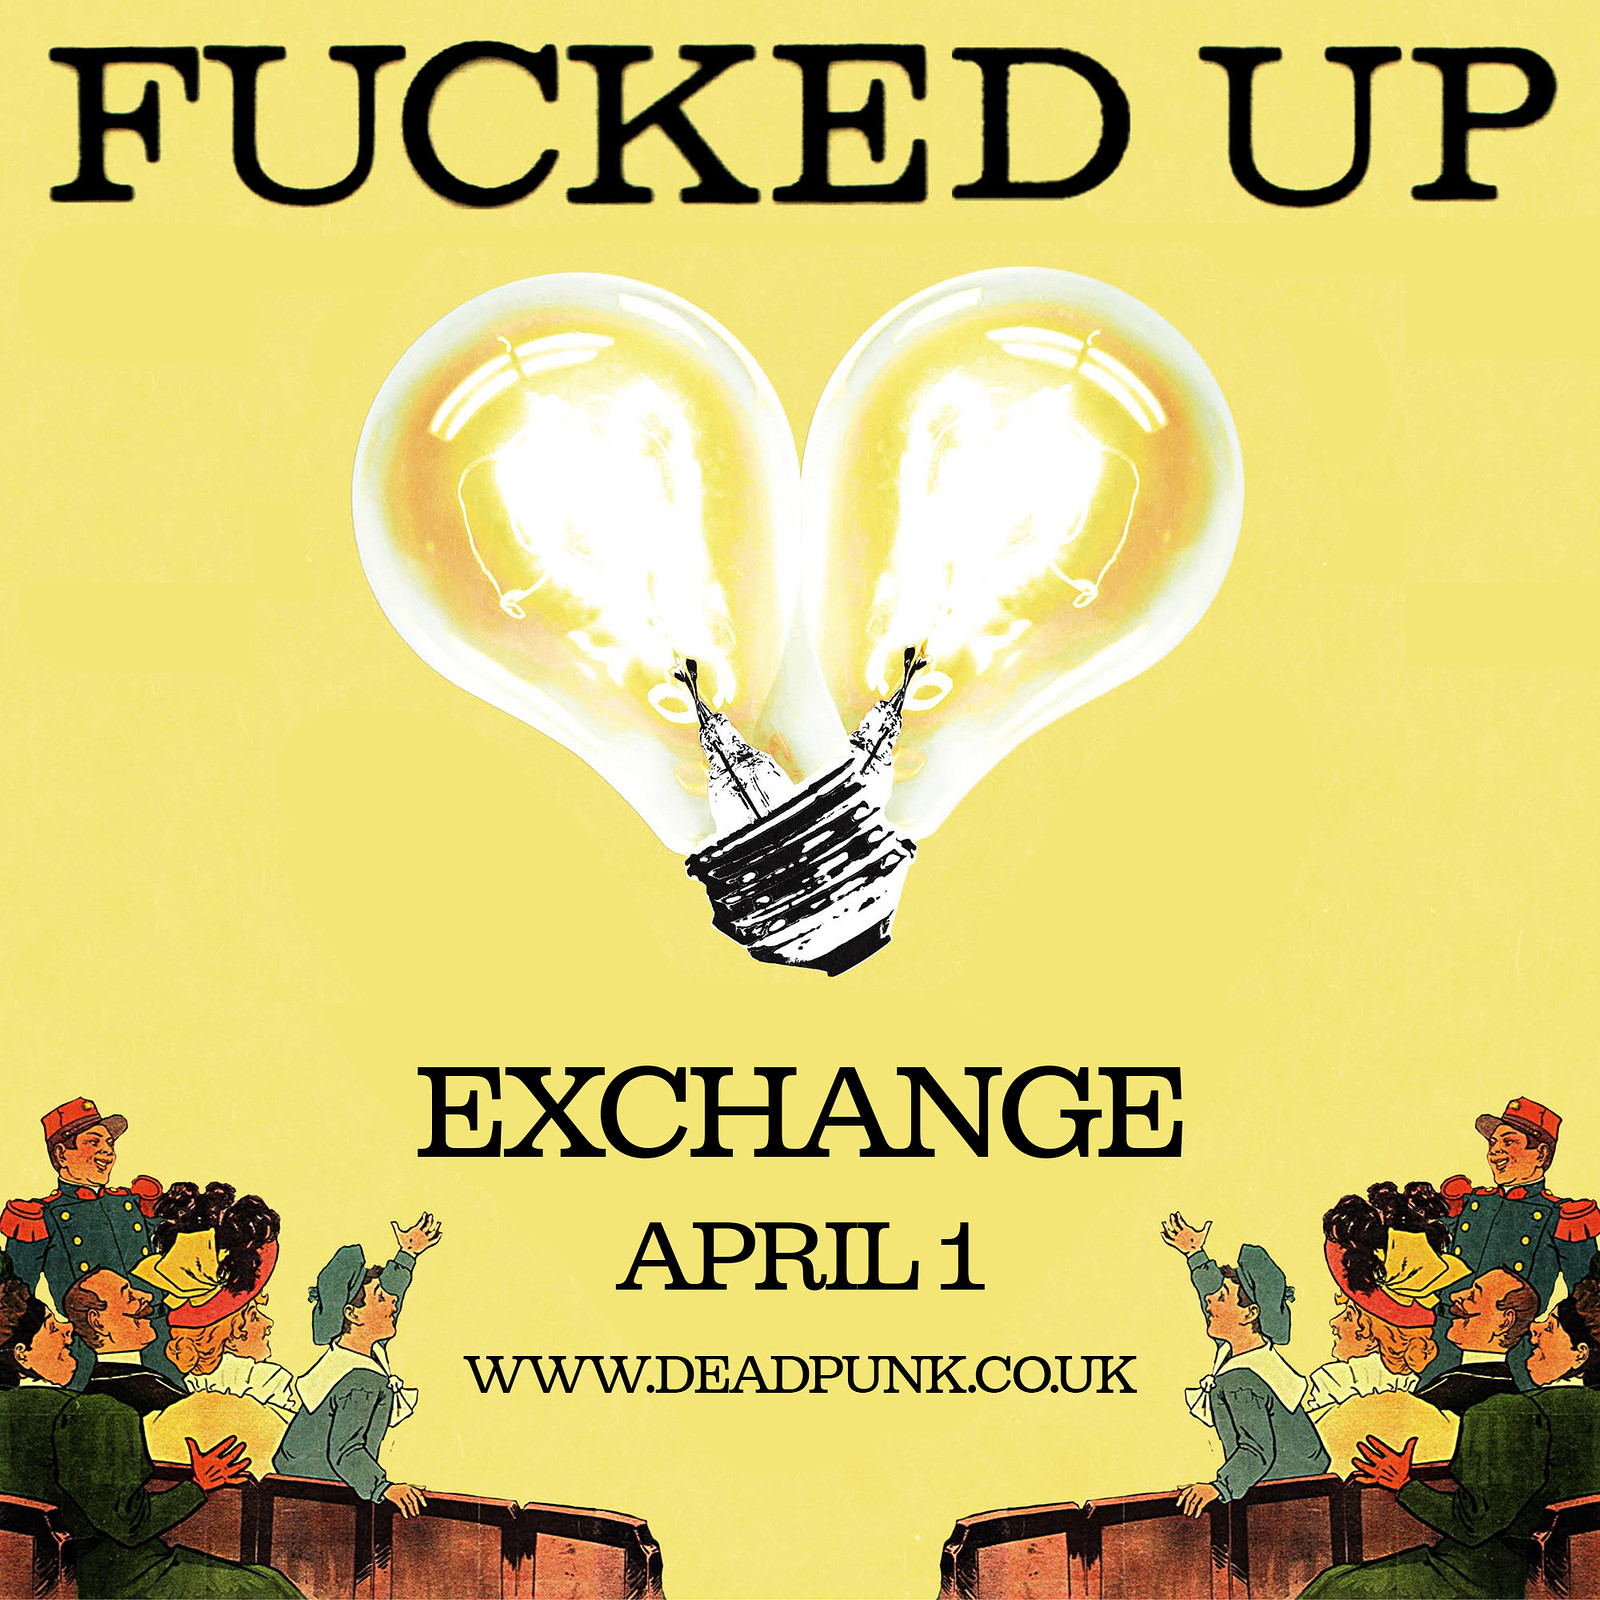 Fucked Up at Exchange